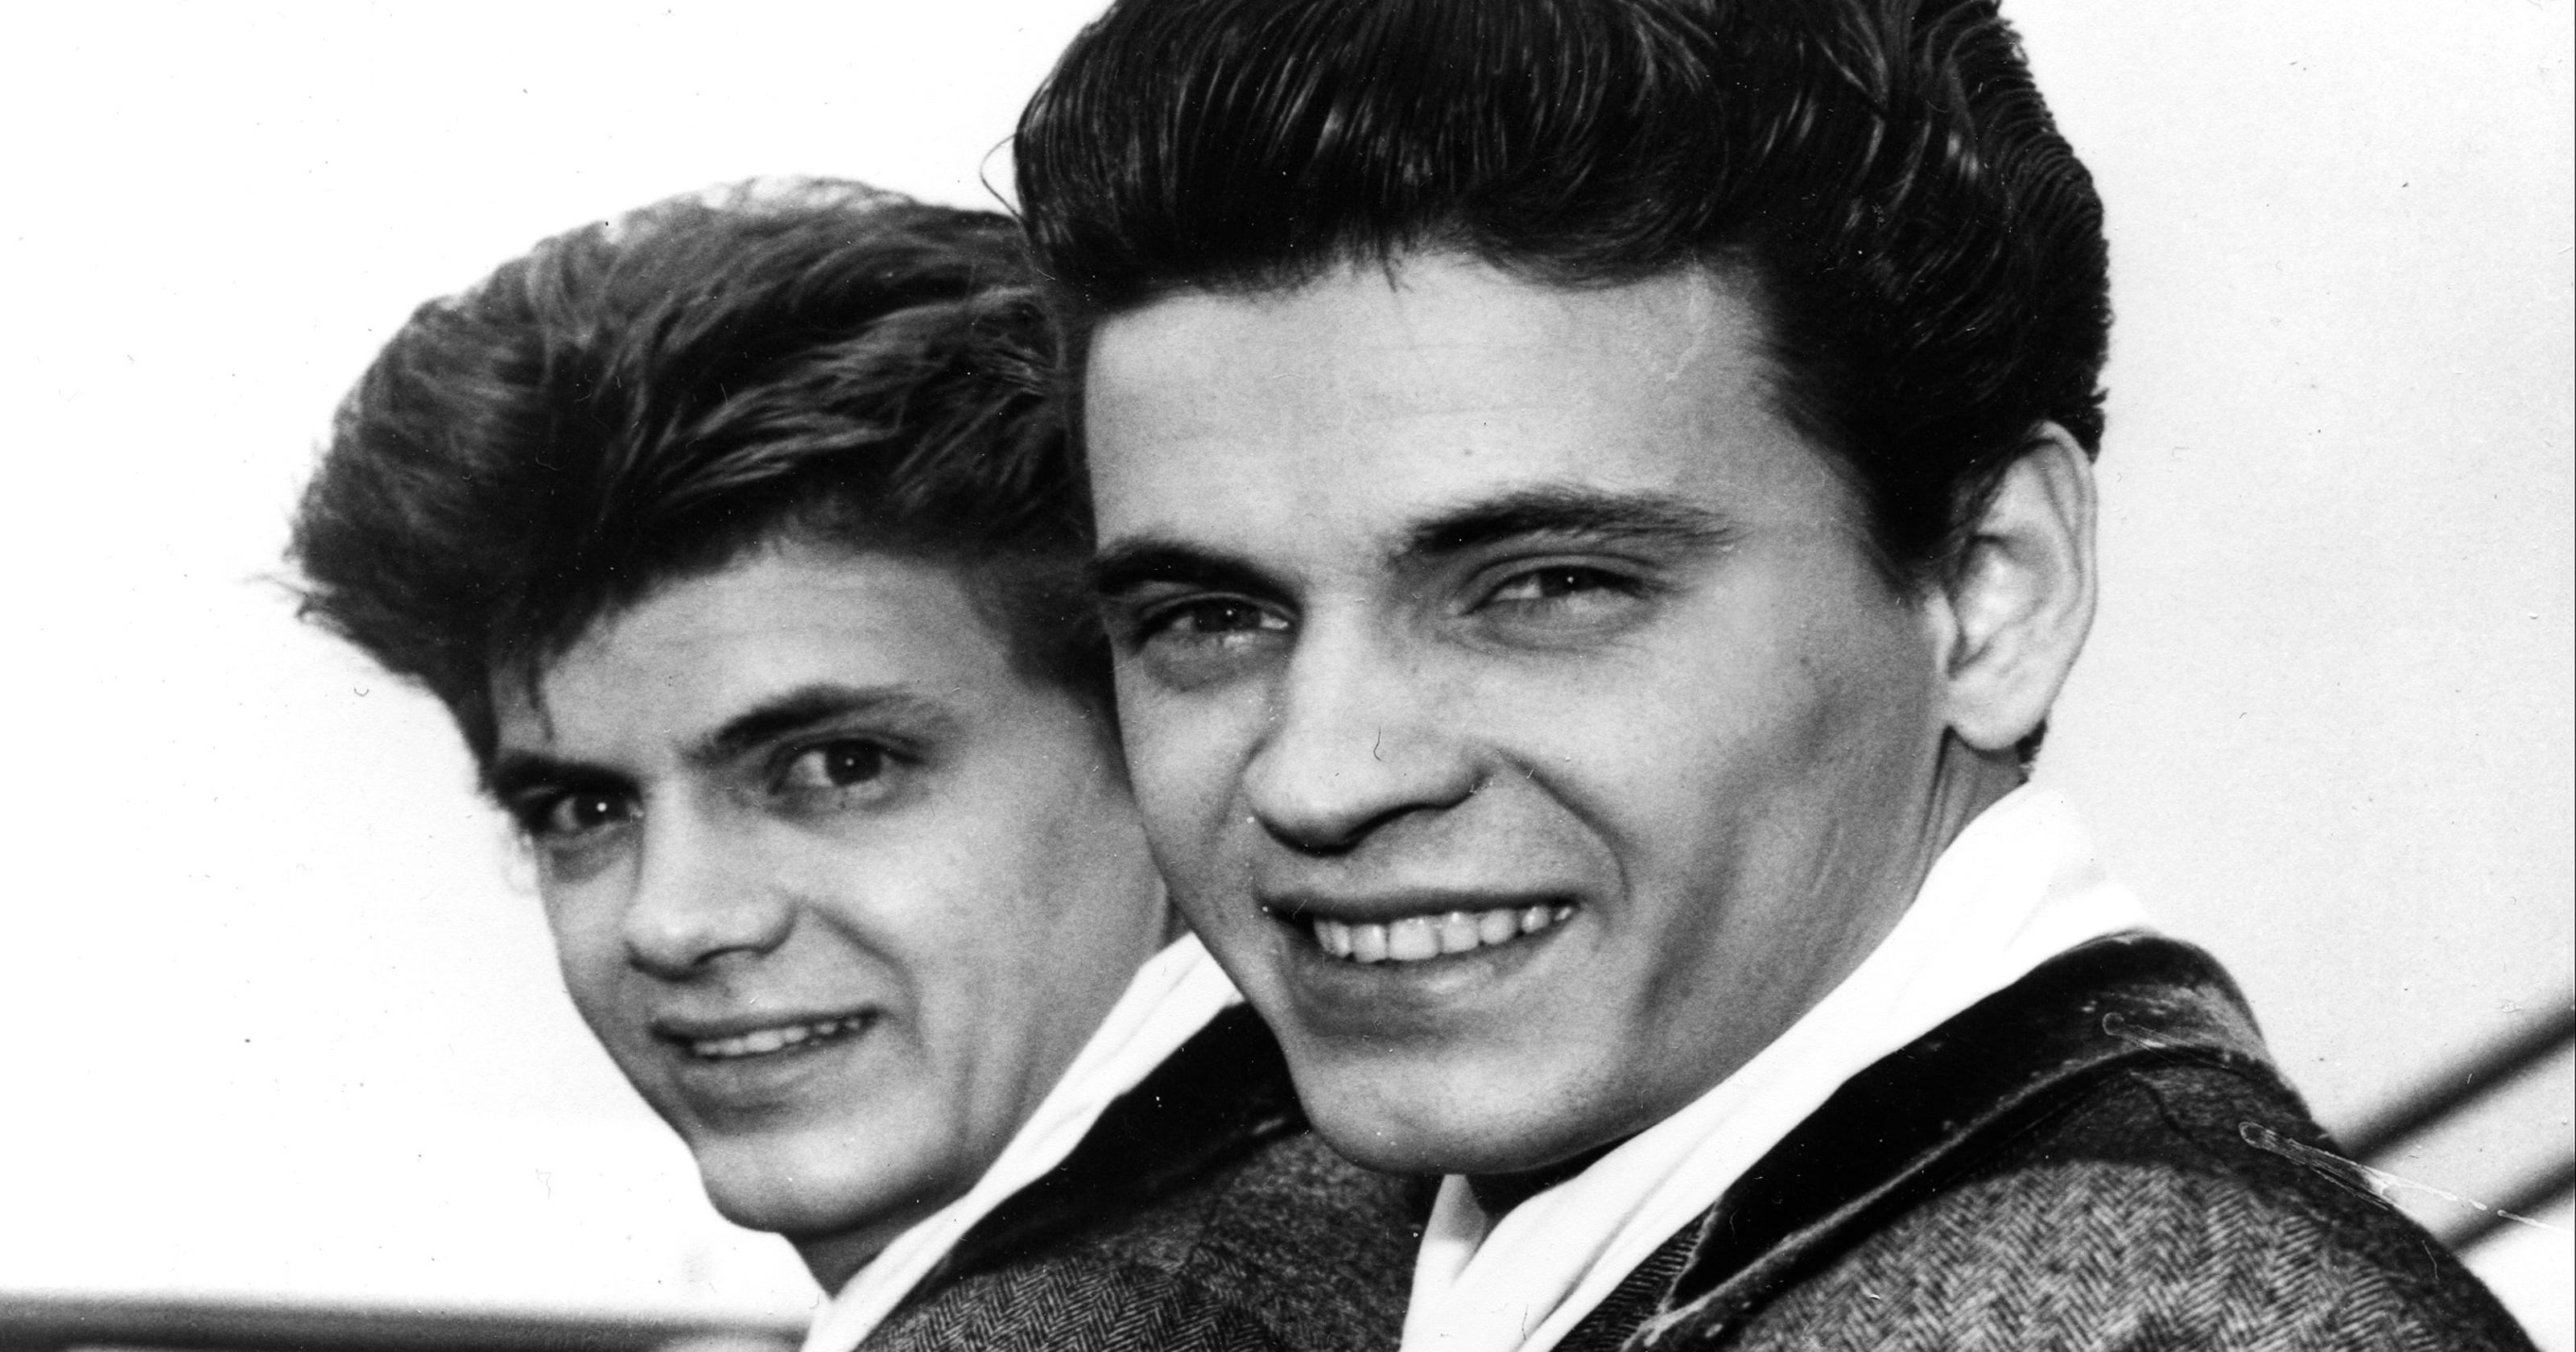 The Everly Brothers Essential listening